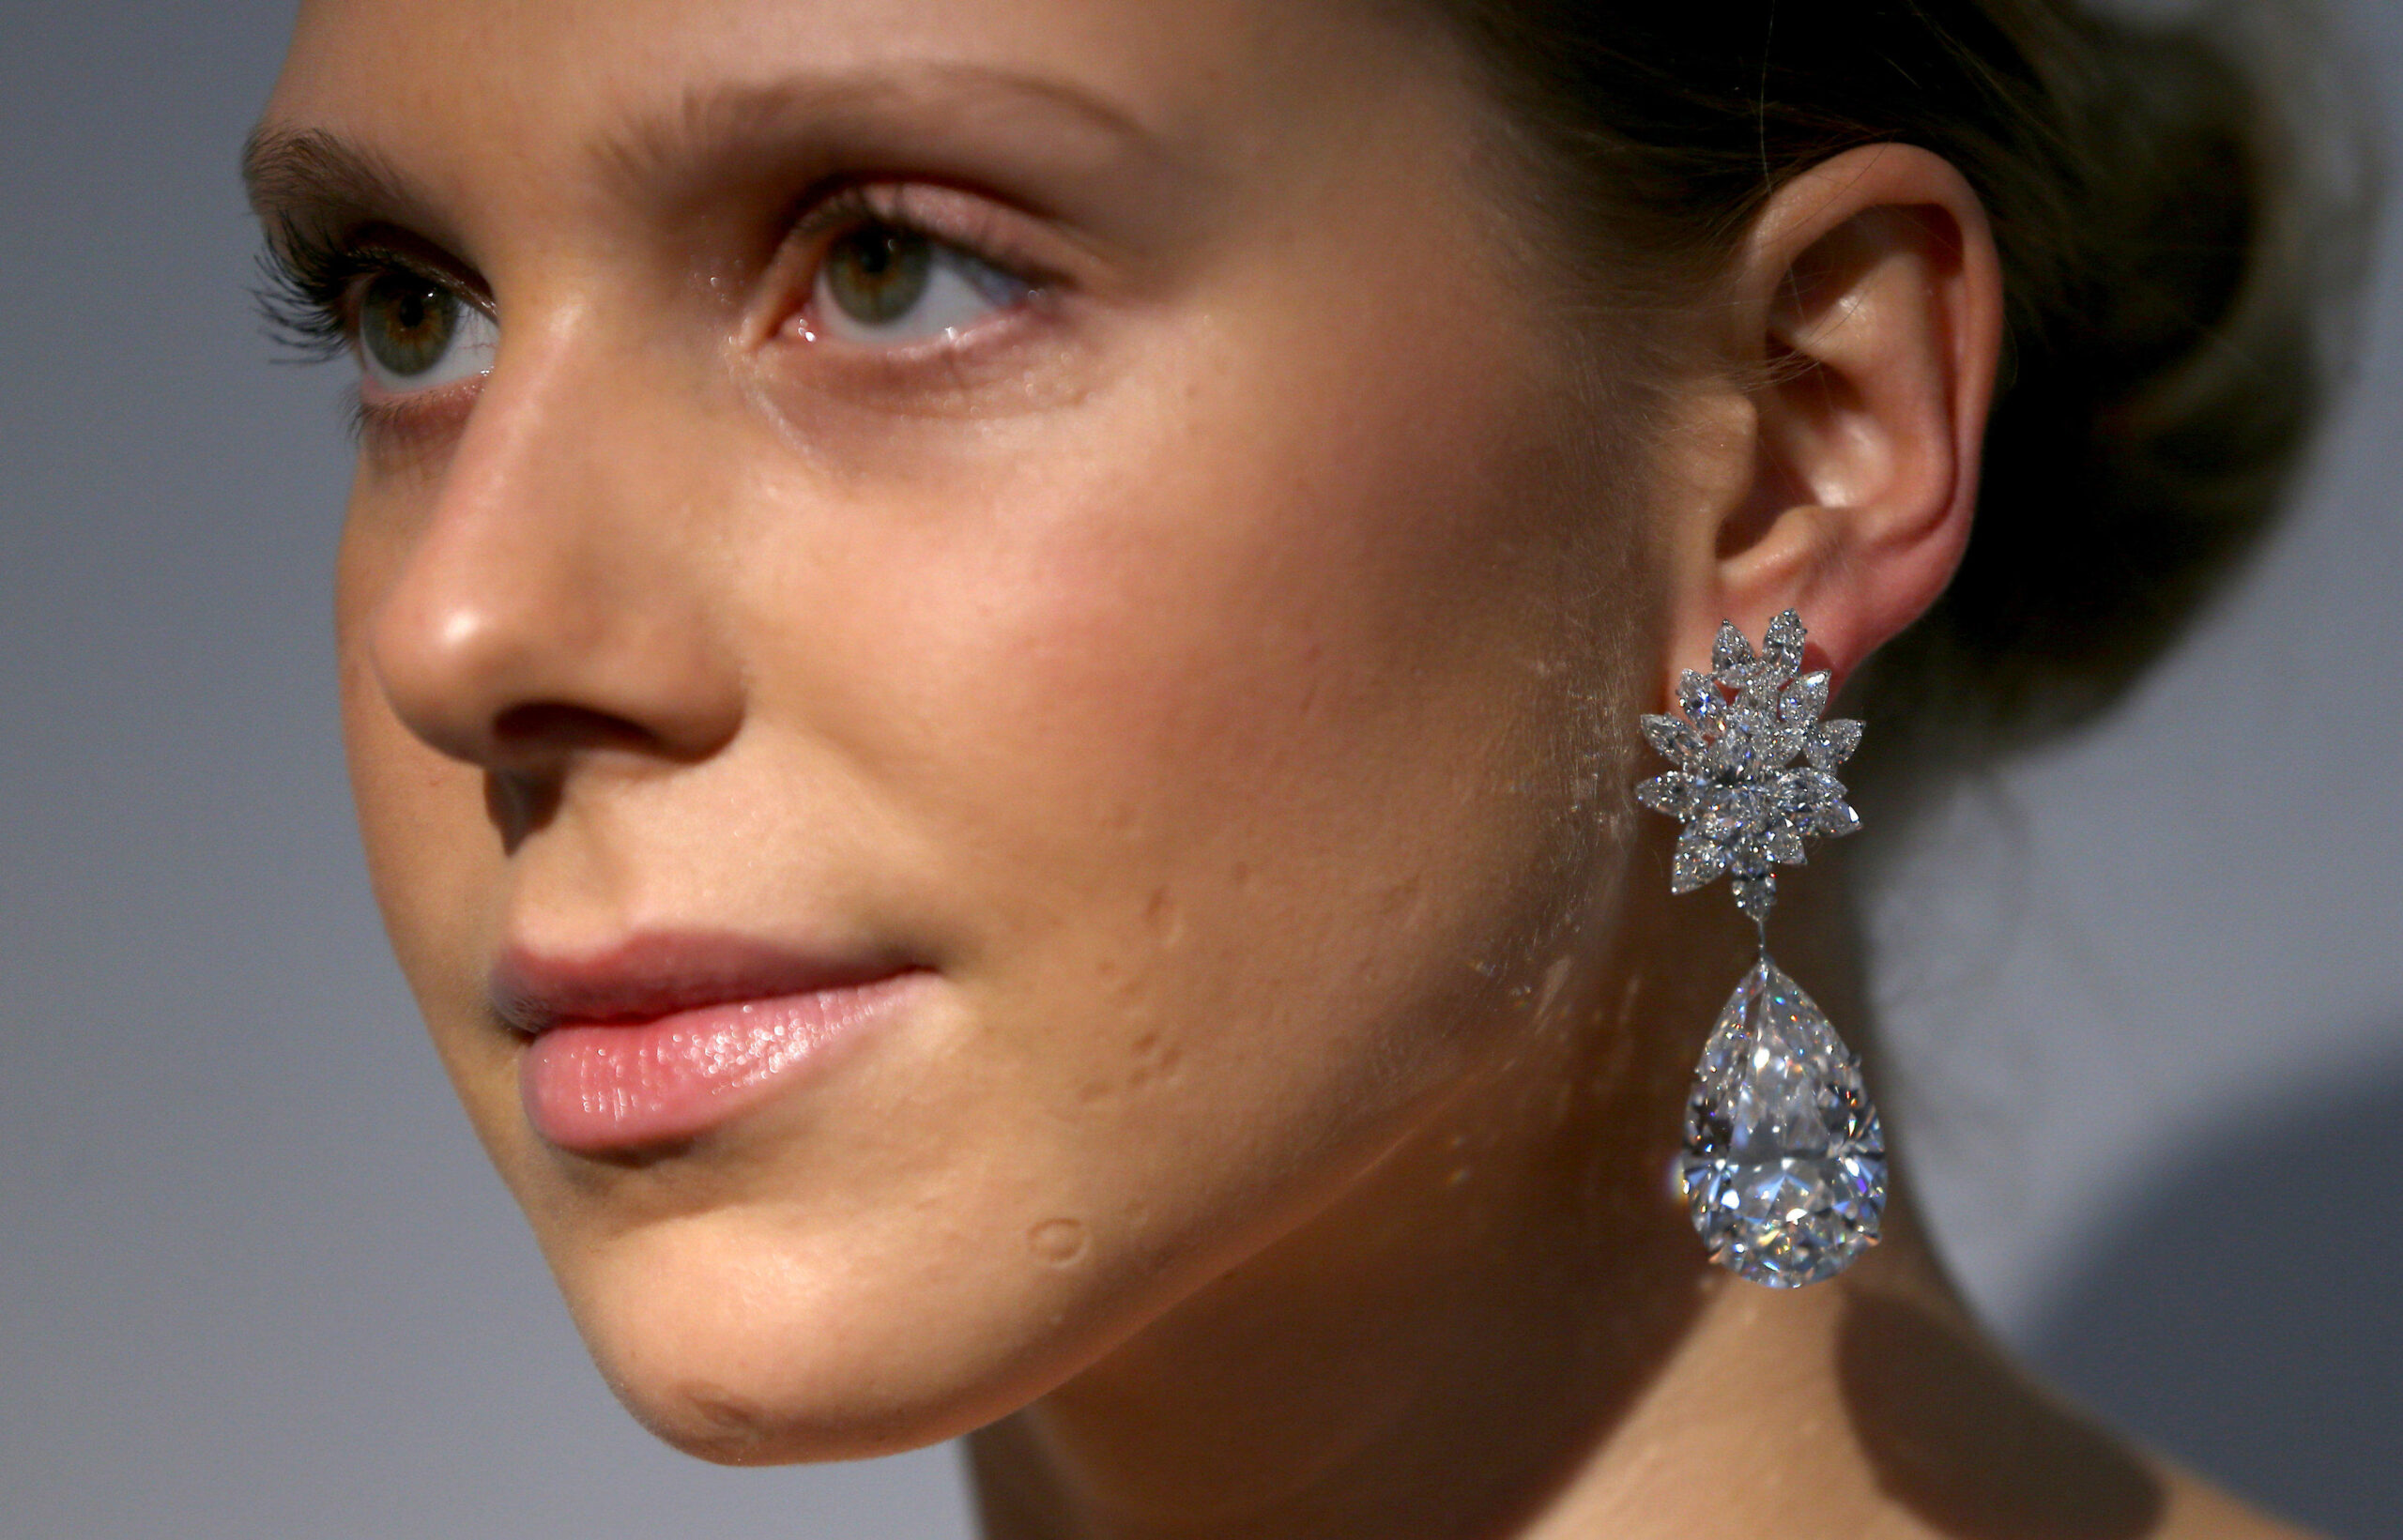 most expensive earrings in the world